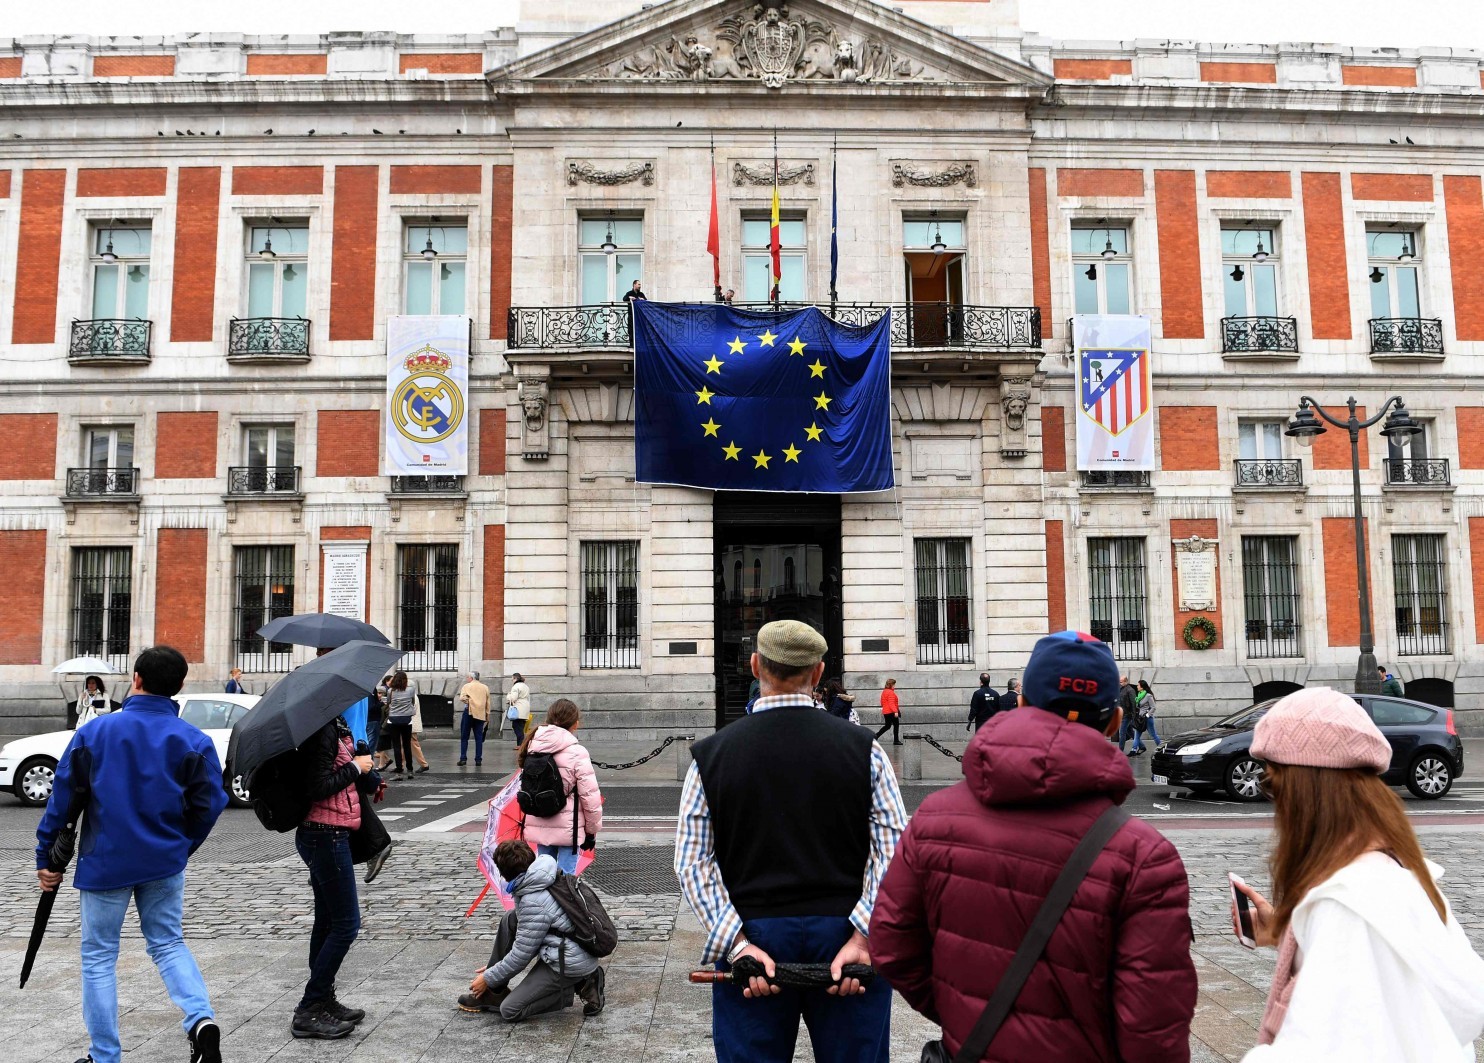 The European Union flag is displayed between two soccer club banners on the Royal Post Office, the seat of the office of the president of Madrid. (Gerard Julien/Agence France-Presse via Getty Images)